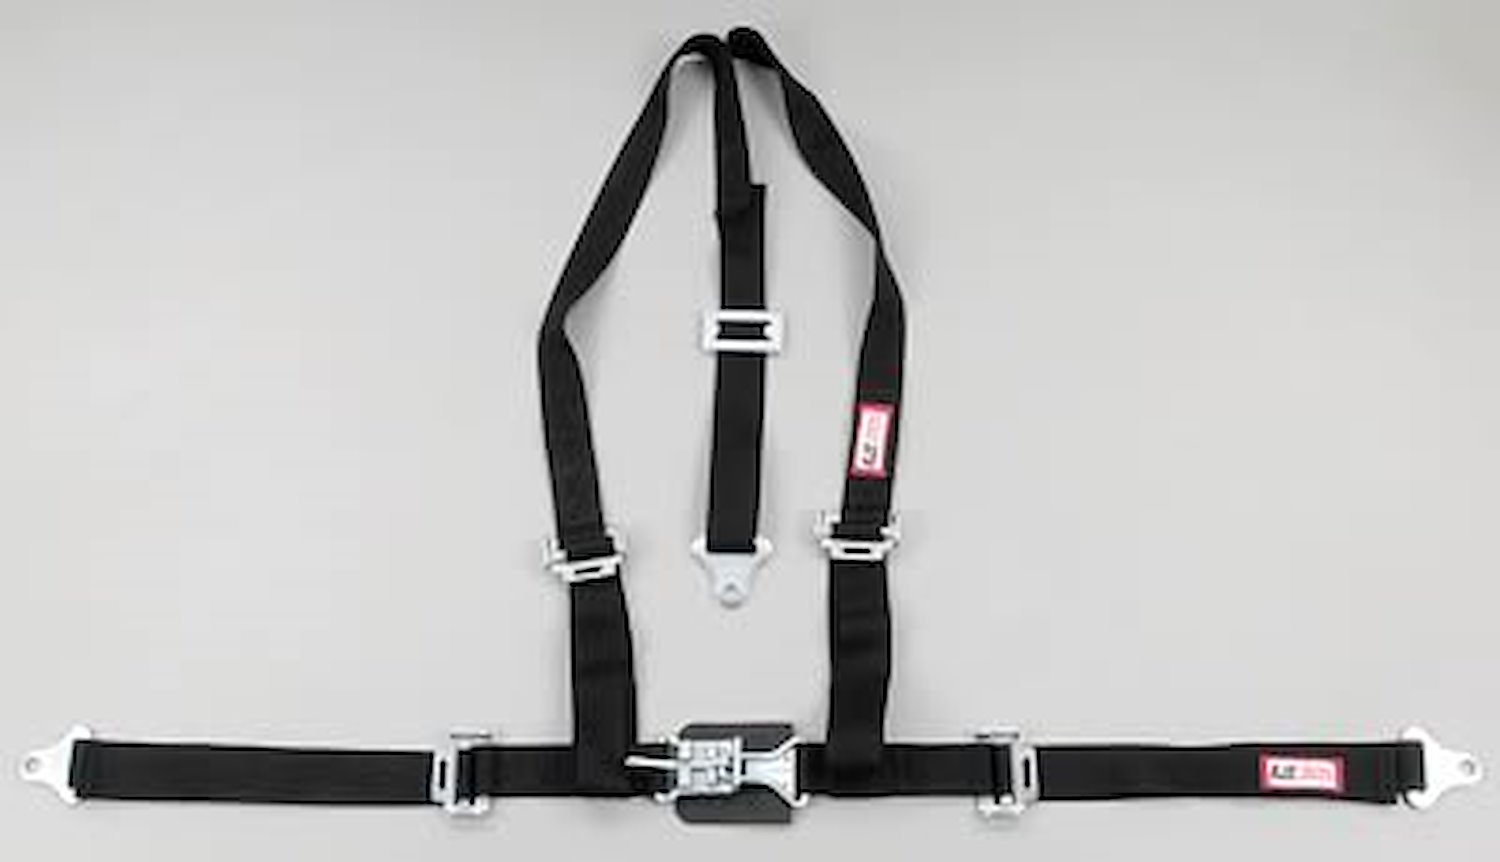 NON-SFI L&L HARNESS 2 PULL UP Lap Belt SEWN IN 2 S.H. INDIVIDUAL FLOOR Mount ALL WRAP ENDS GRAY